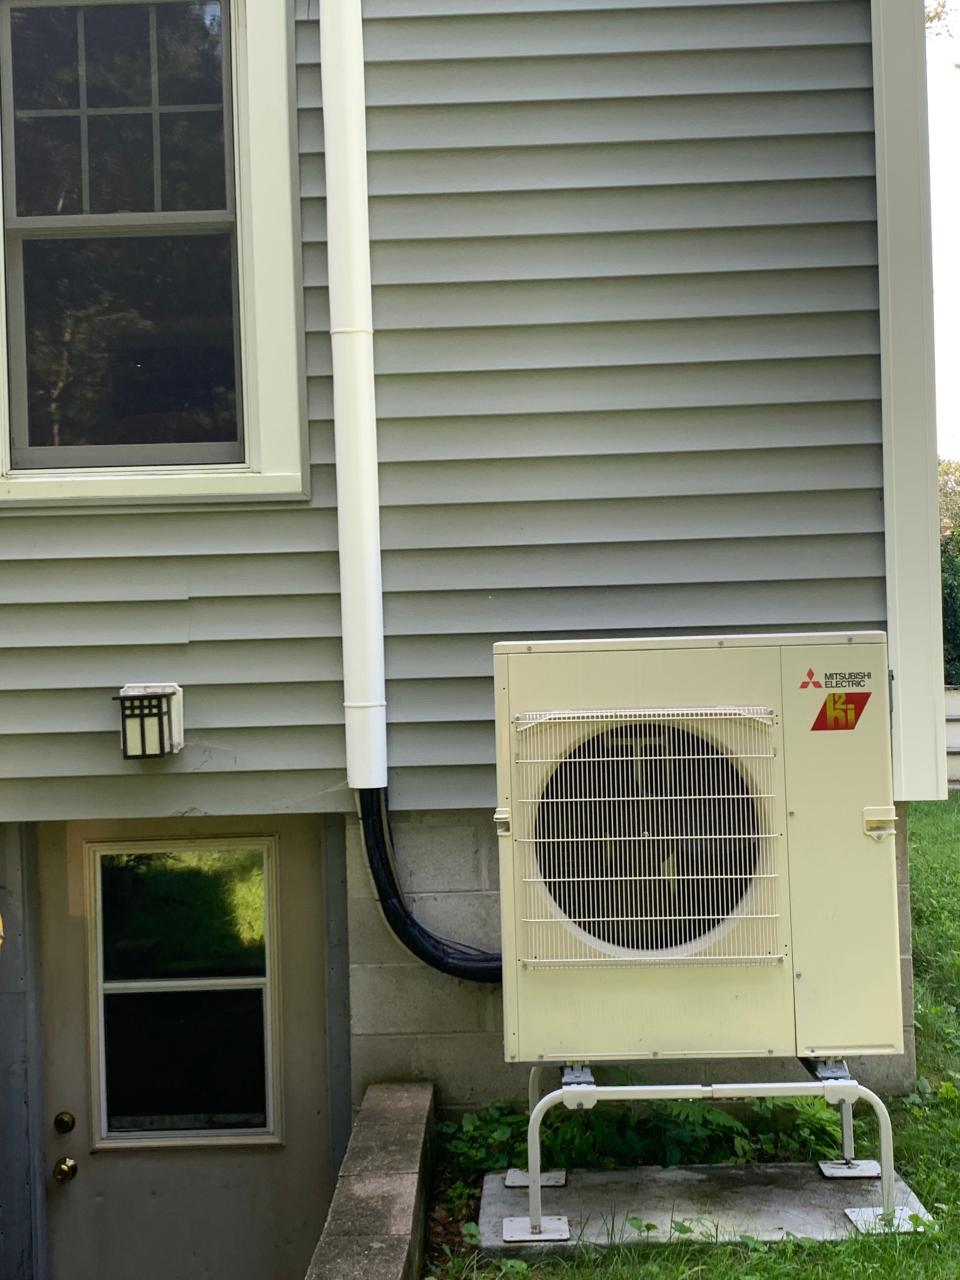 A heat pump provides cool air in the summer and heat in winter.